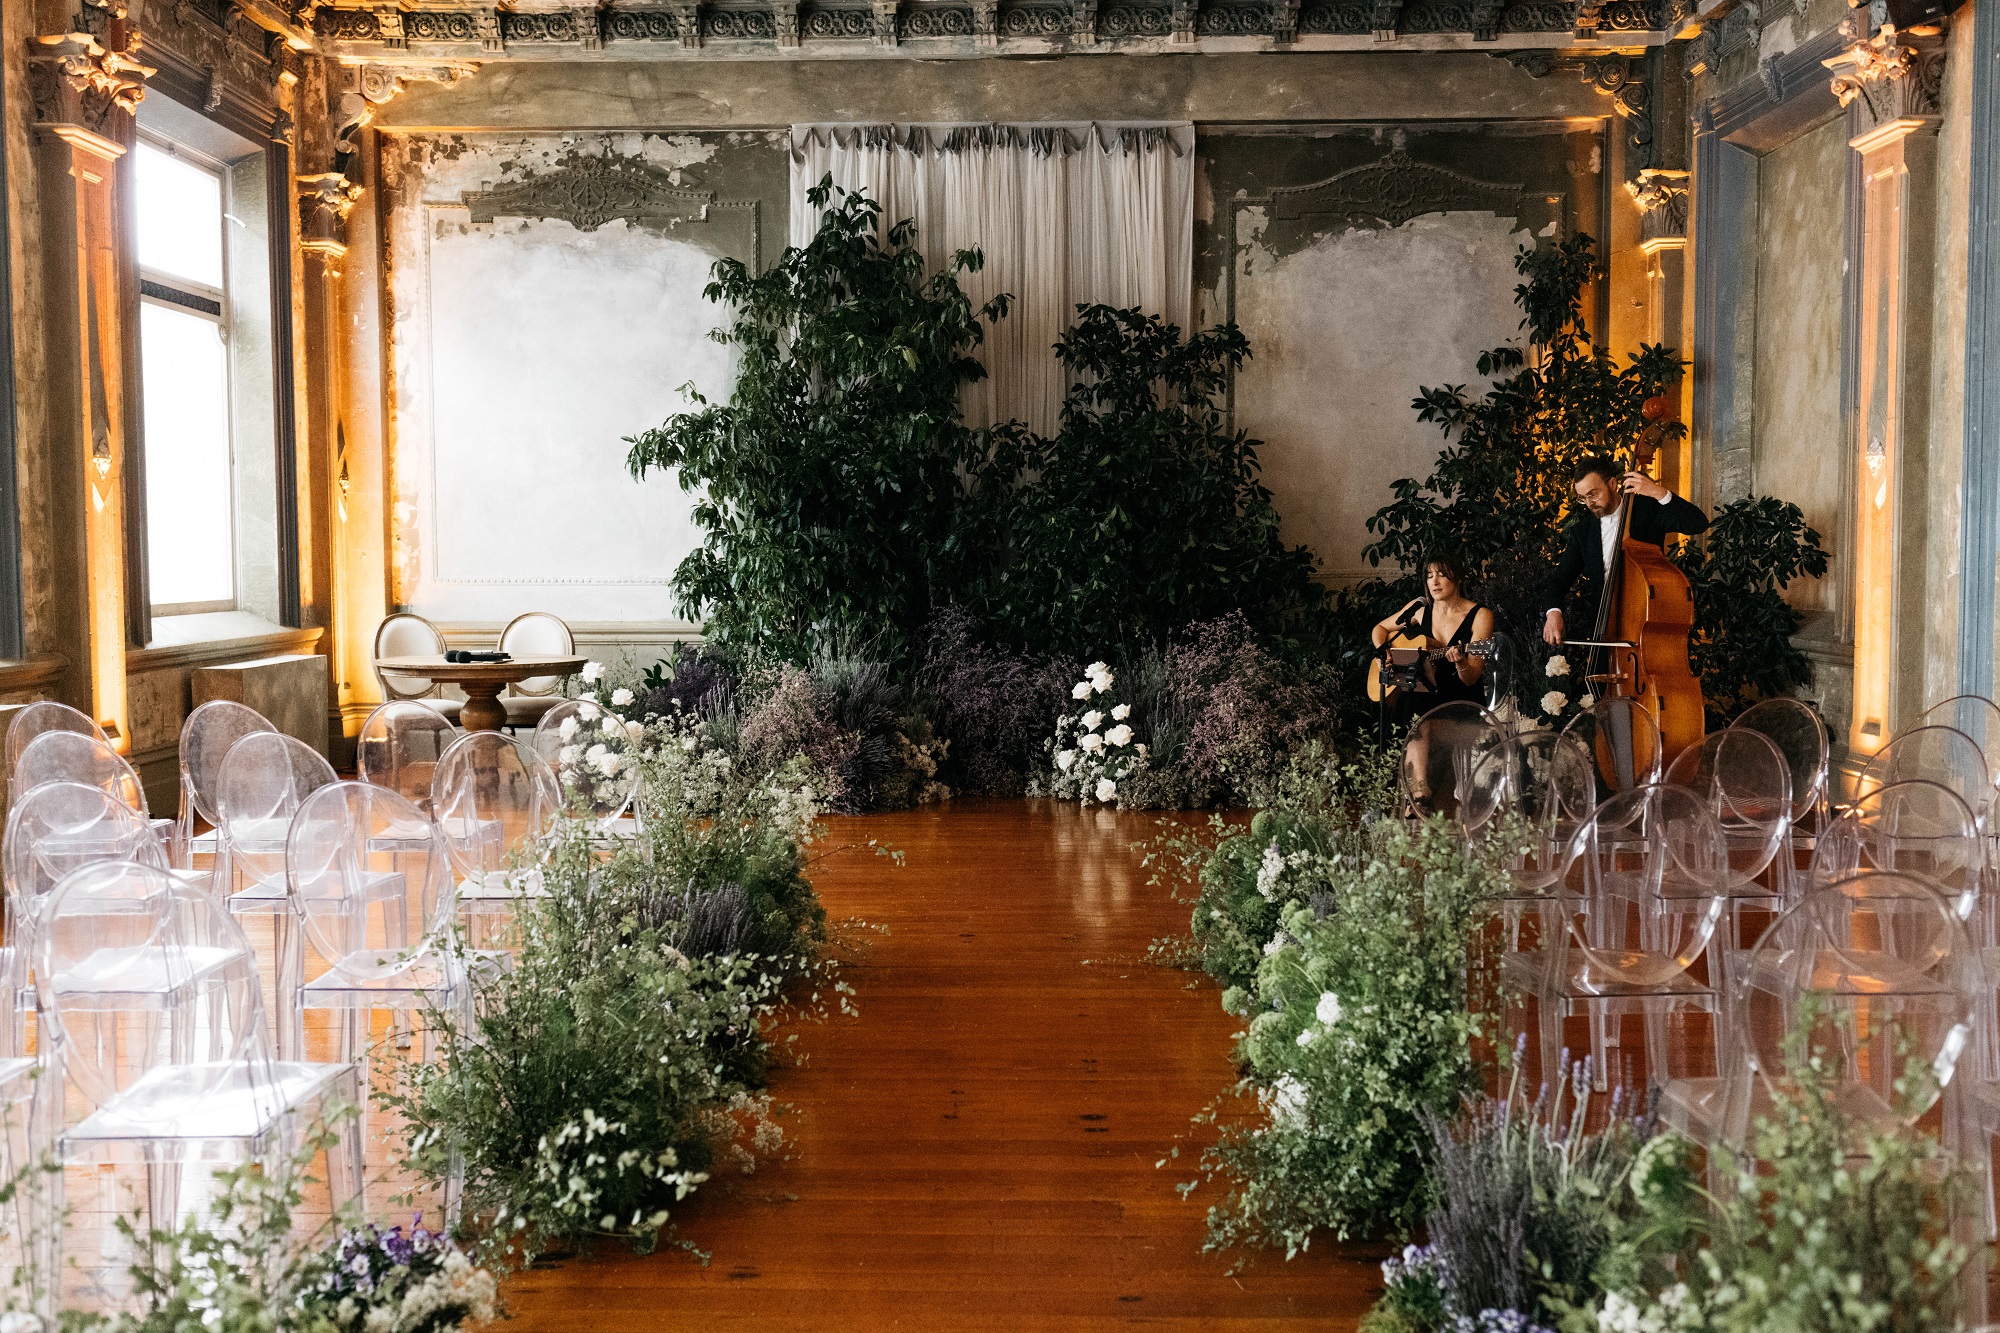 Dreamy wedding ceremony backdrops to inspire your day